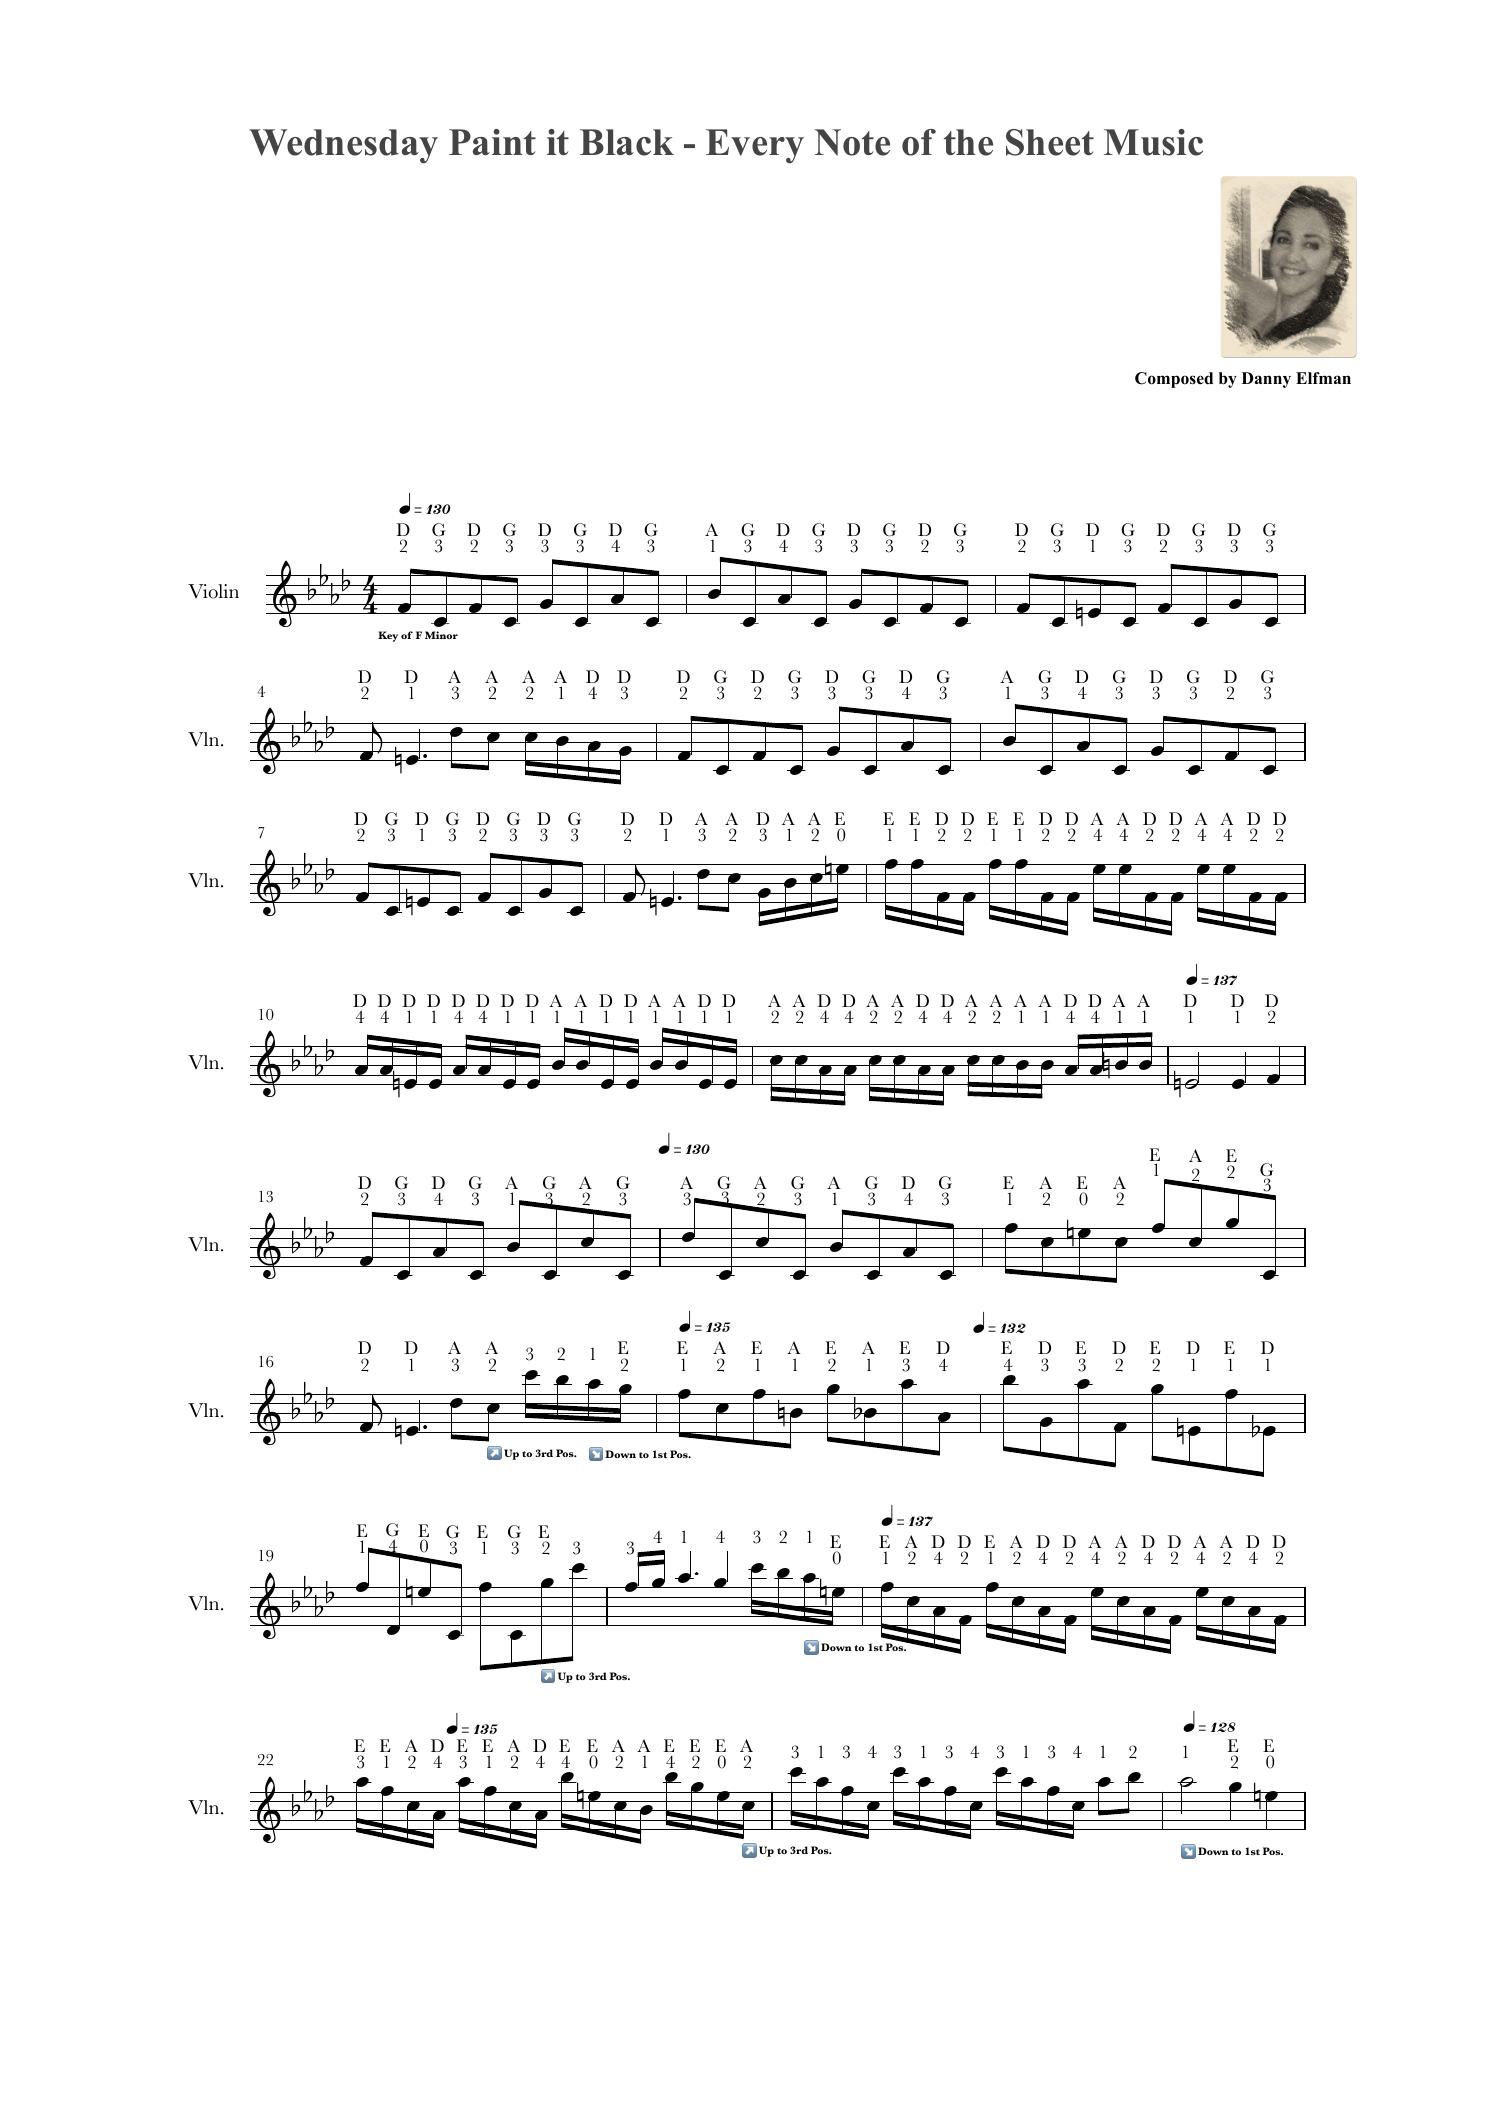 Laboratorio ajuste instante Wednesday Paint it Black - Every Note of the Sheet Music.pdf | DocDroid